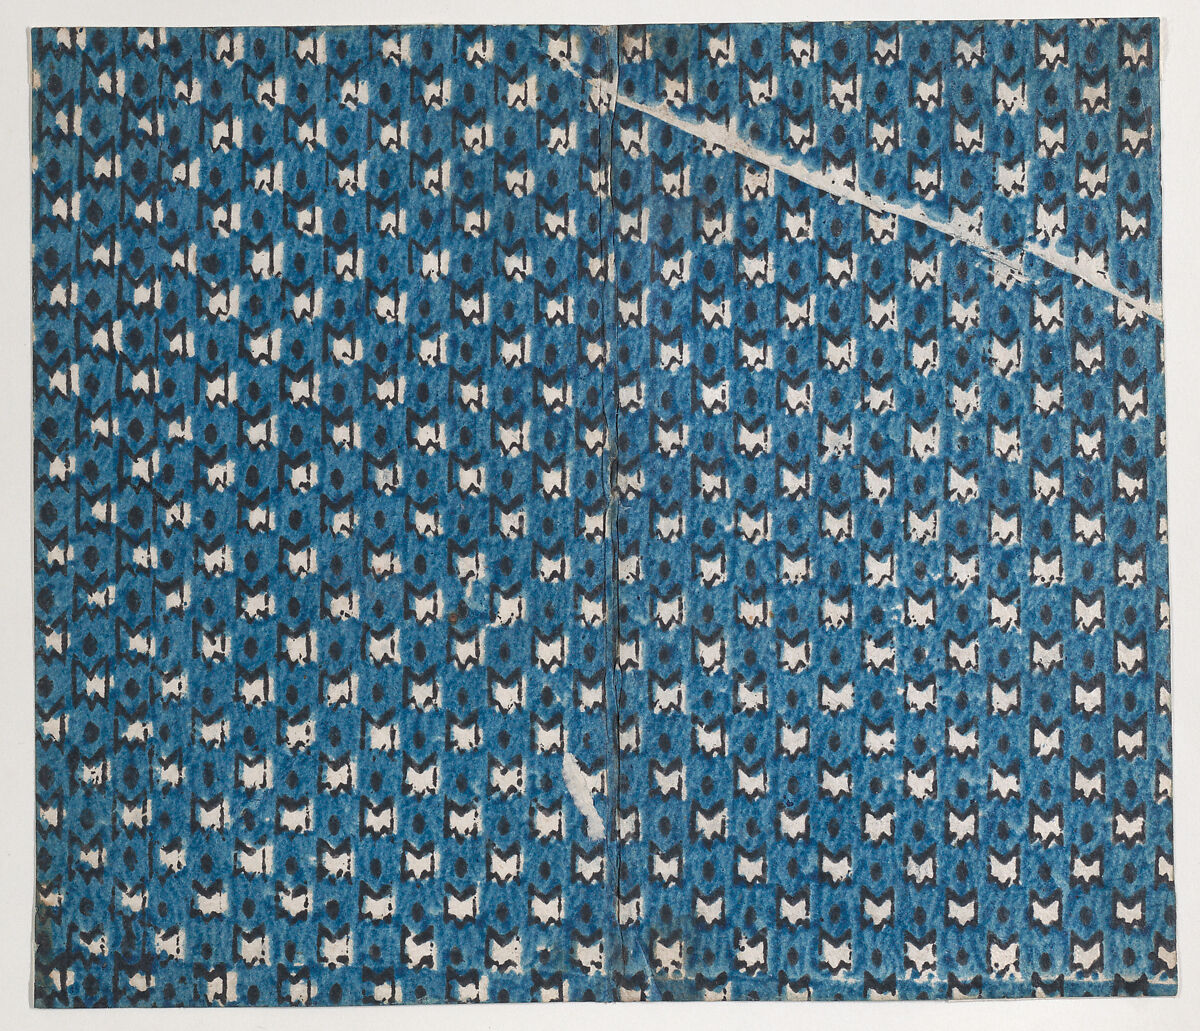 Book cover with overall pattern of stars within ovals, Anonymous  , 19th century, Relief print (wood or metal) 